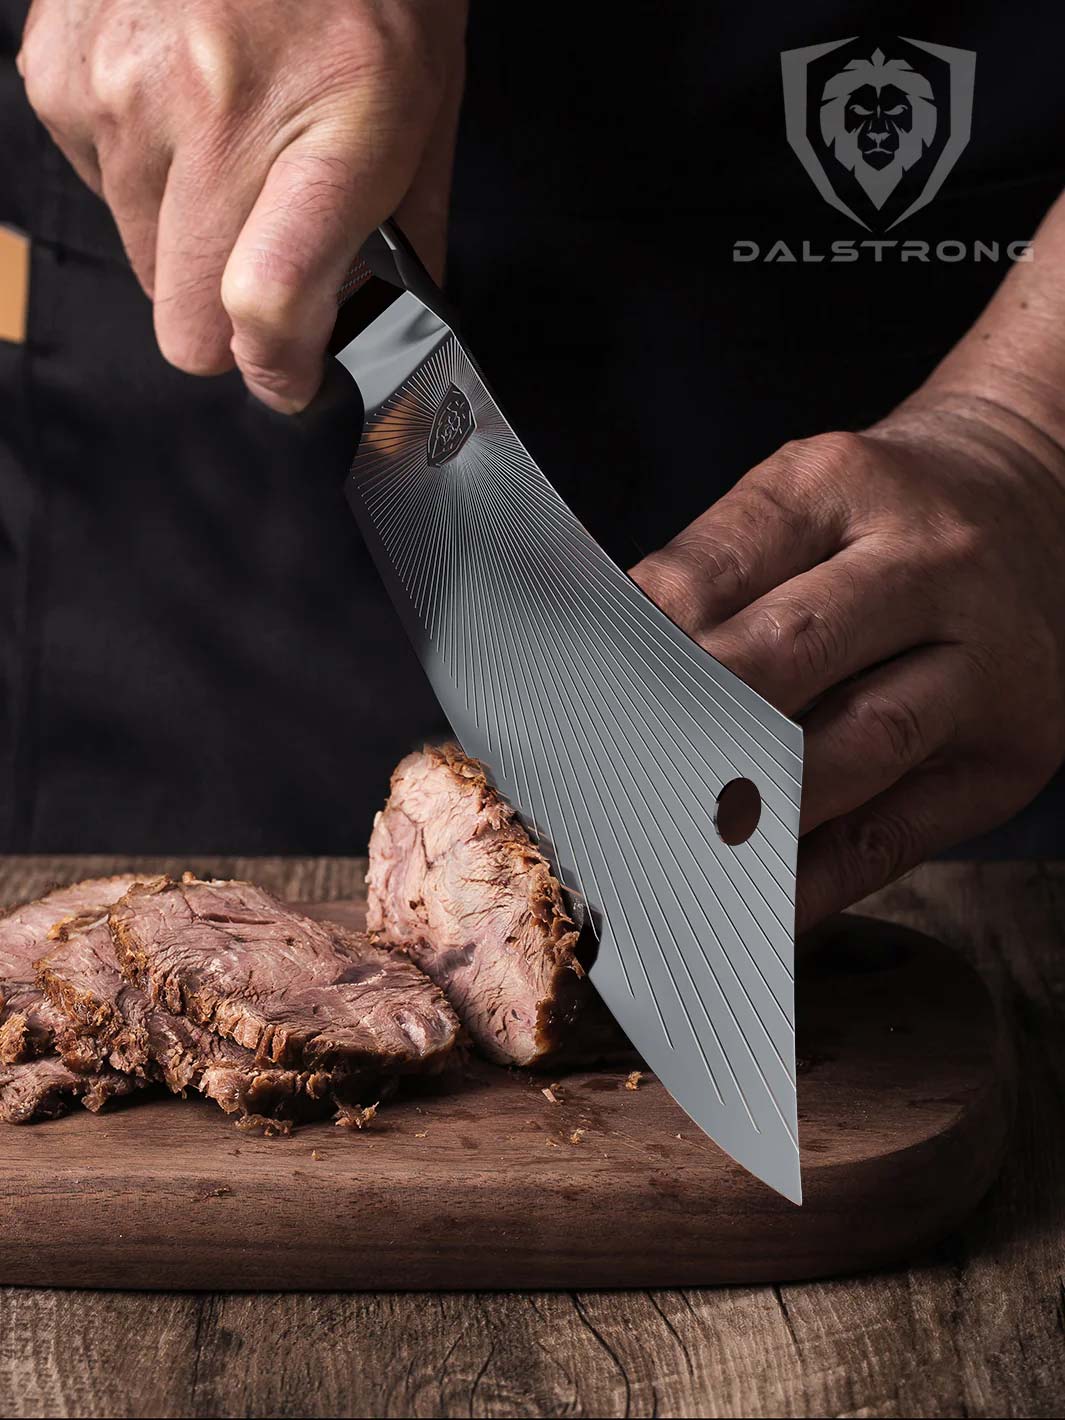 Dalstrong quantum 1 series 8 inch crixus cleaver knife with dragon skin handle and slices of meat on a cutting board.